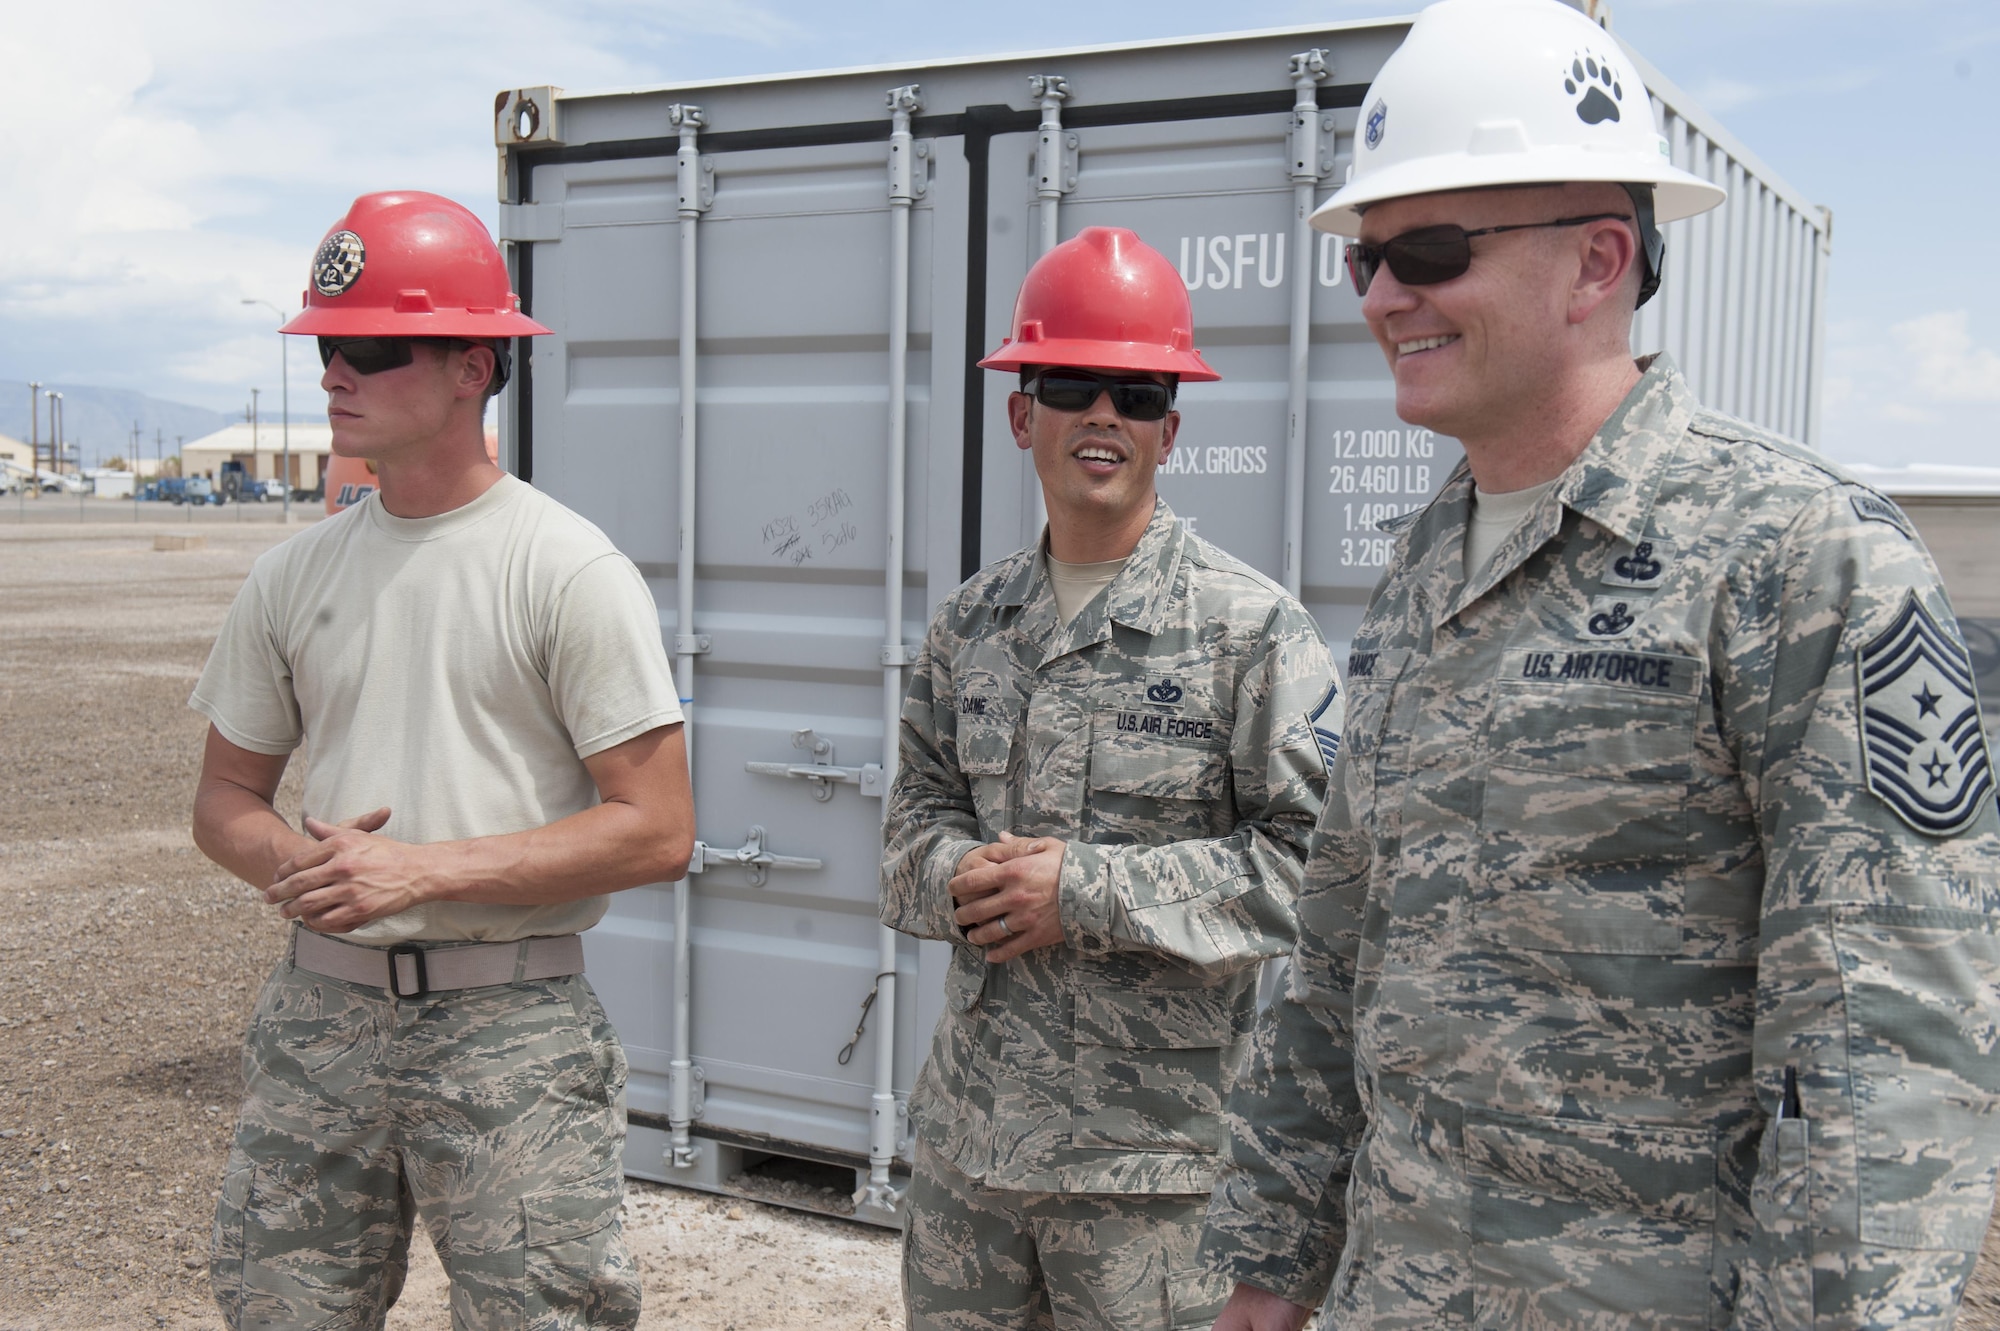 Chief Master Sgt. Jason France, Air Force Materiel Command command chief, visits Holloman Air Force Base, N.M., June 6, 2017. France traveled to various sections around Basic Expeditionary Airfield Resources Base to receive an overview of how they support the entire Air Force enterprise, discuss challenges they face, and discover ways to advocate for the 635th tenant unit. (U.S. Air Force photo by Airman 1st Class Ilyana A. Escalona)